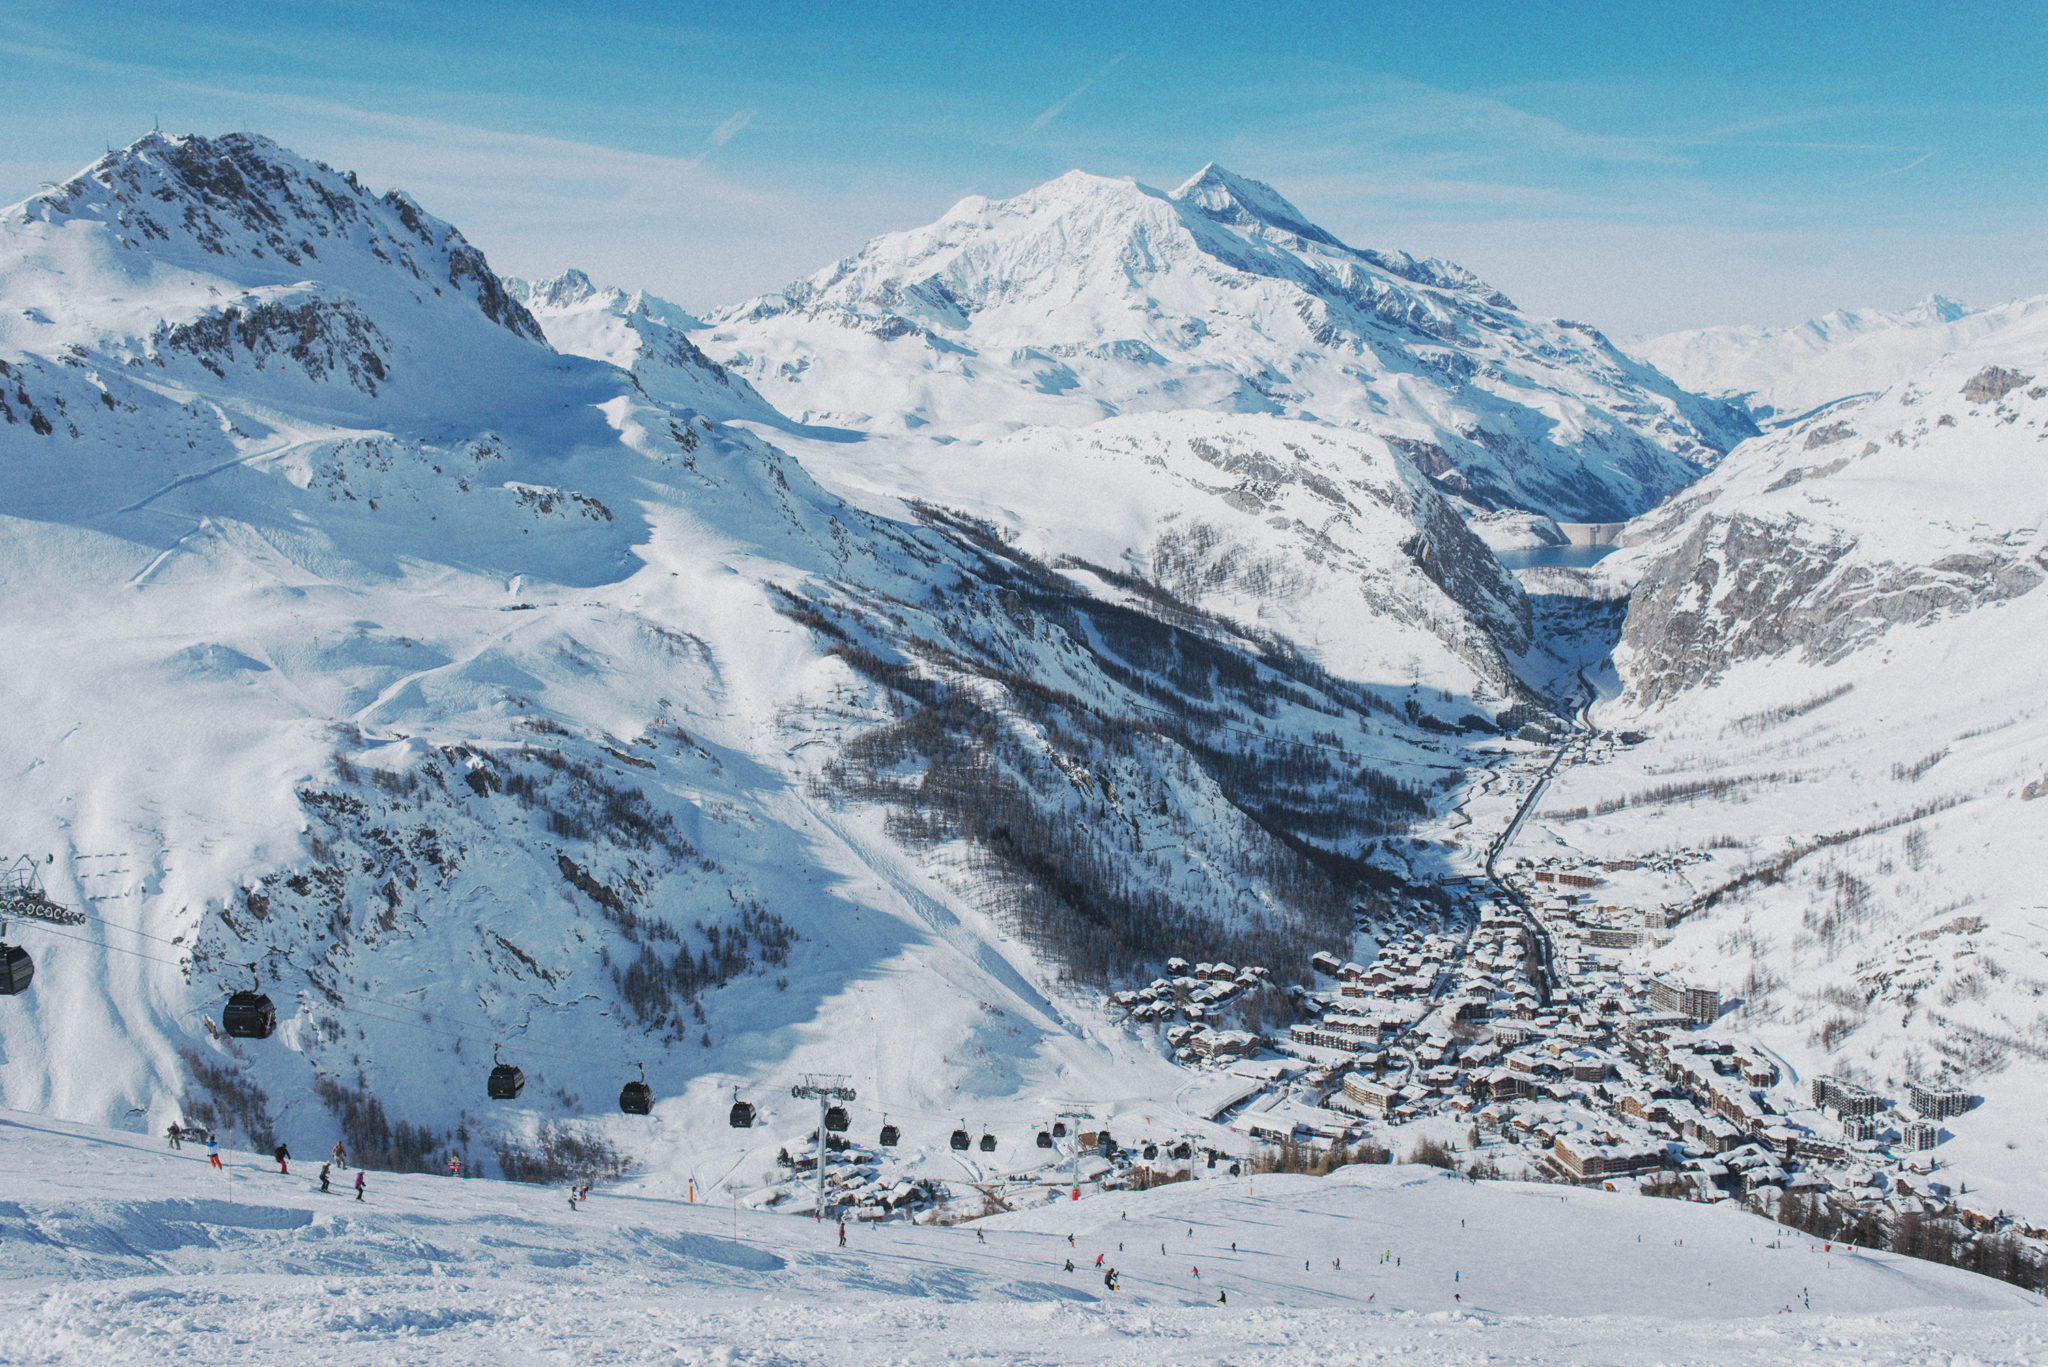 Our luxury guide to Val d'Isère